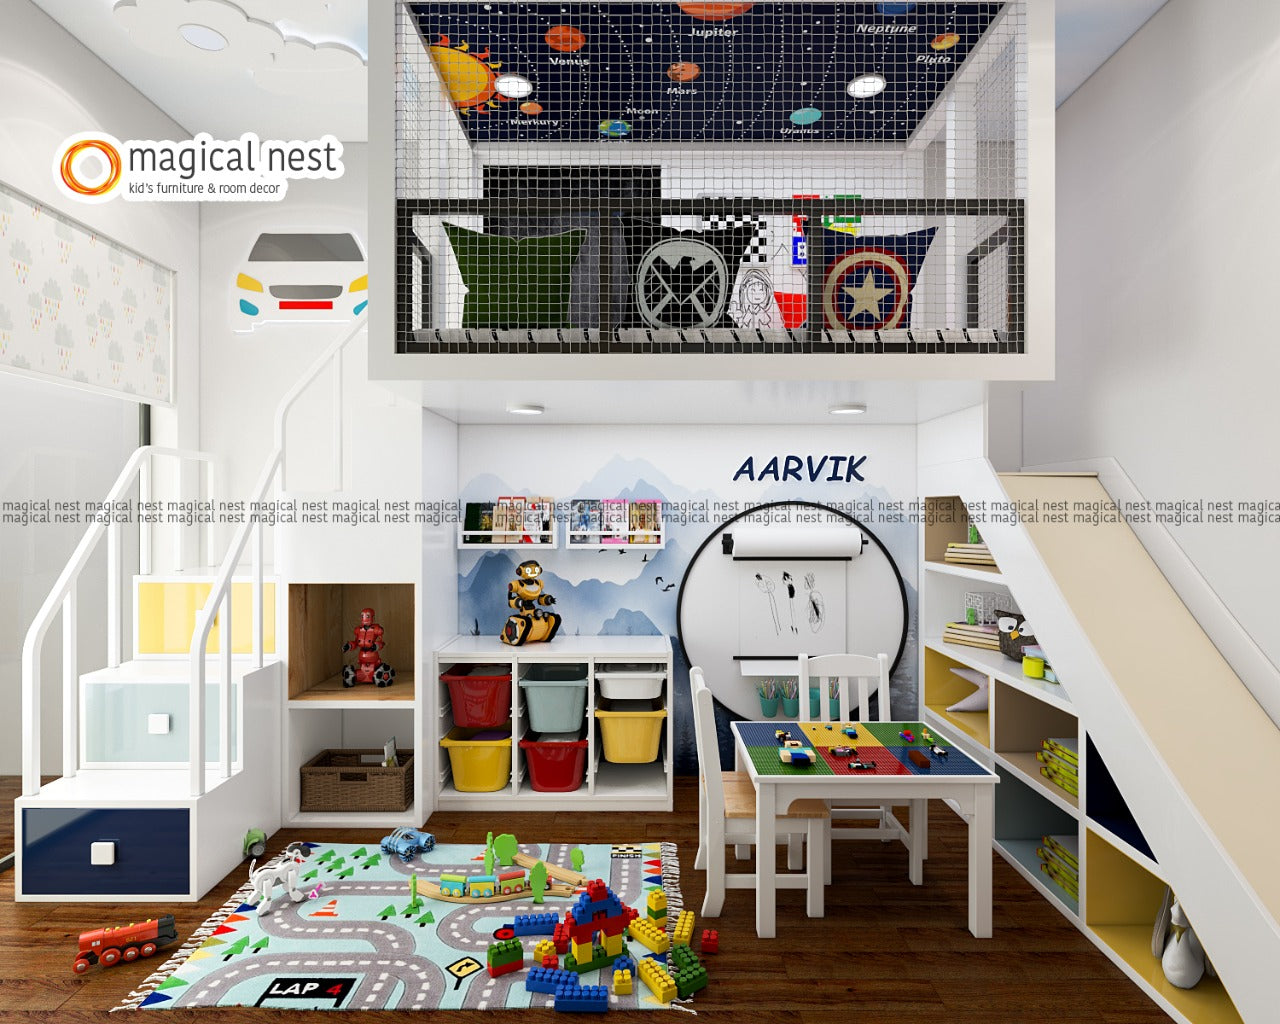 The room has been designed as an exclusive play area. It has a loft area with stairs and slides on either side. The walls have artboard and board games along with ladders and ropes.